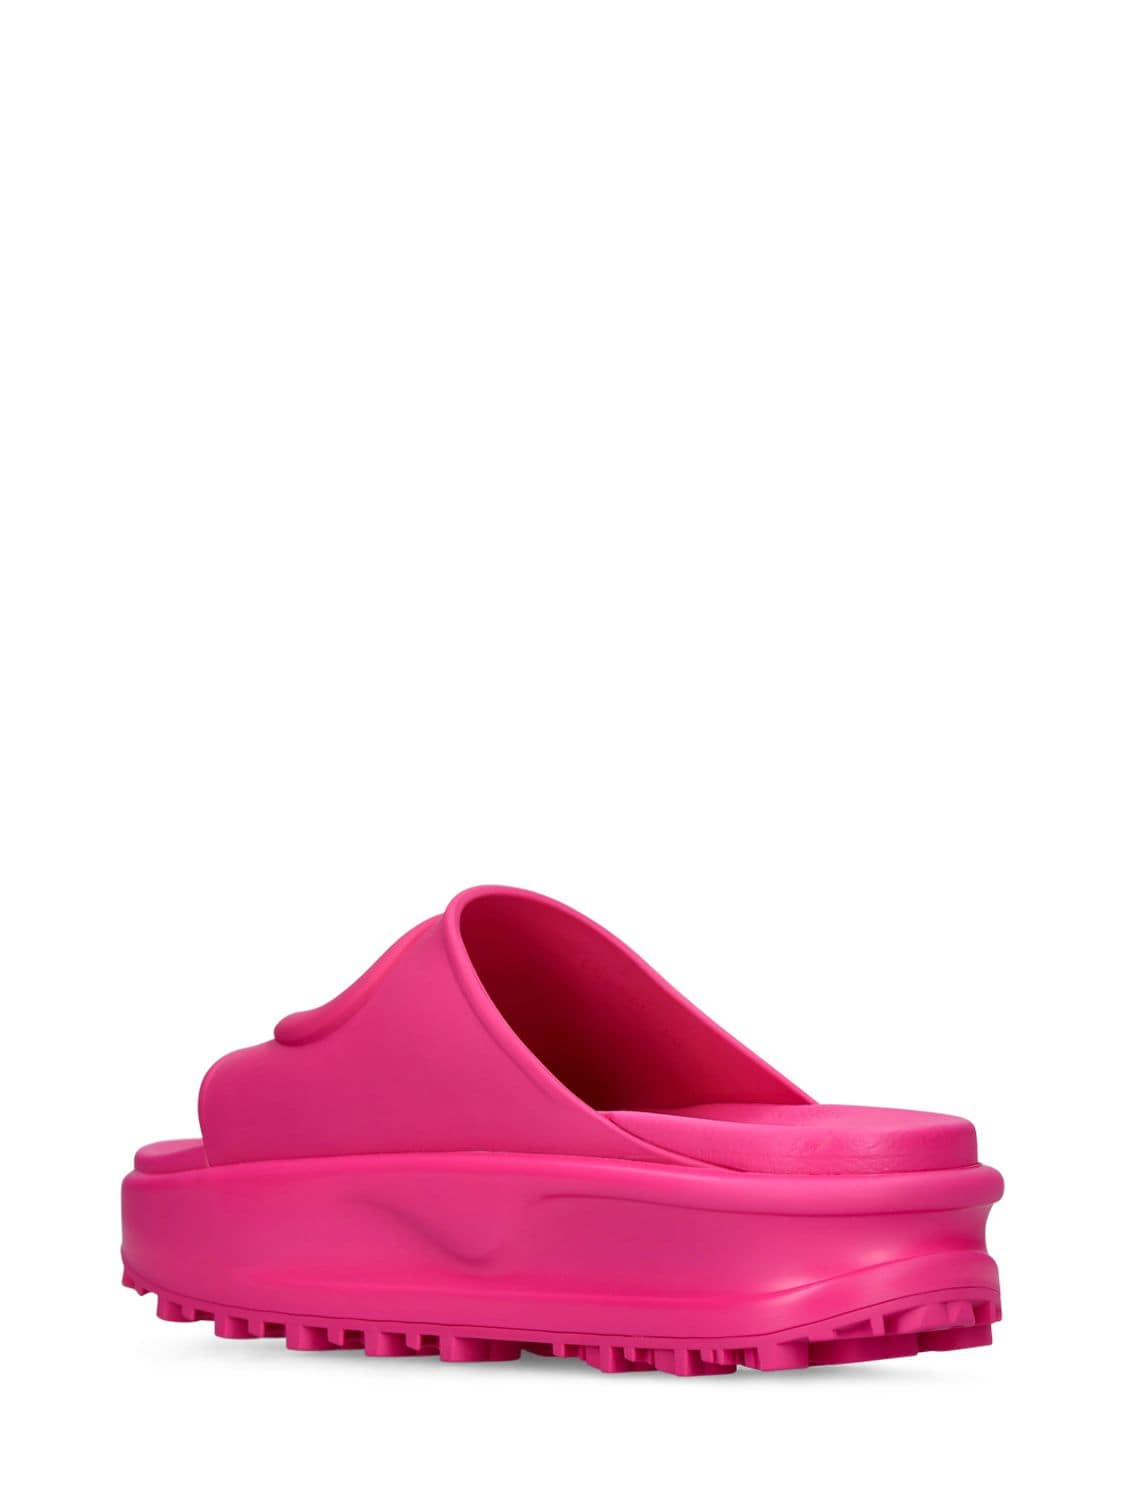 Gucci 40mm Miami Rubber Pool Slides In Box Pink | ModeSens